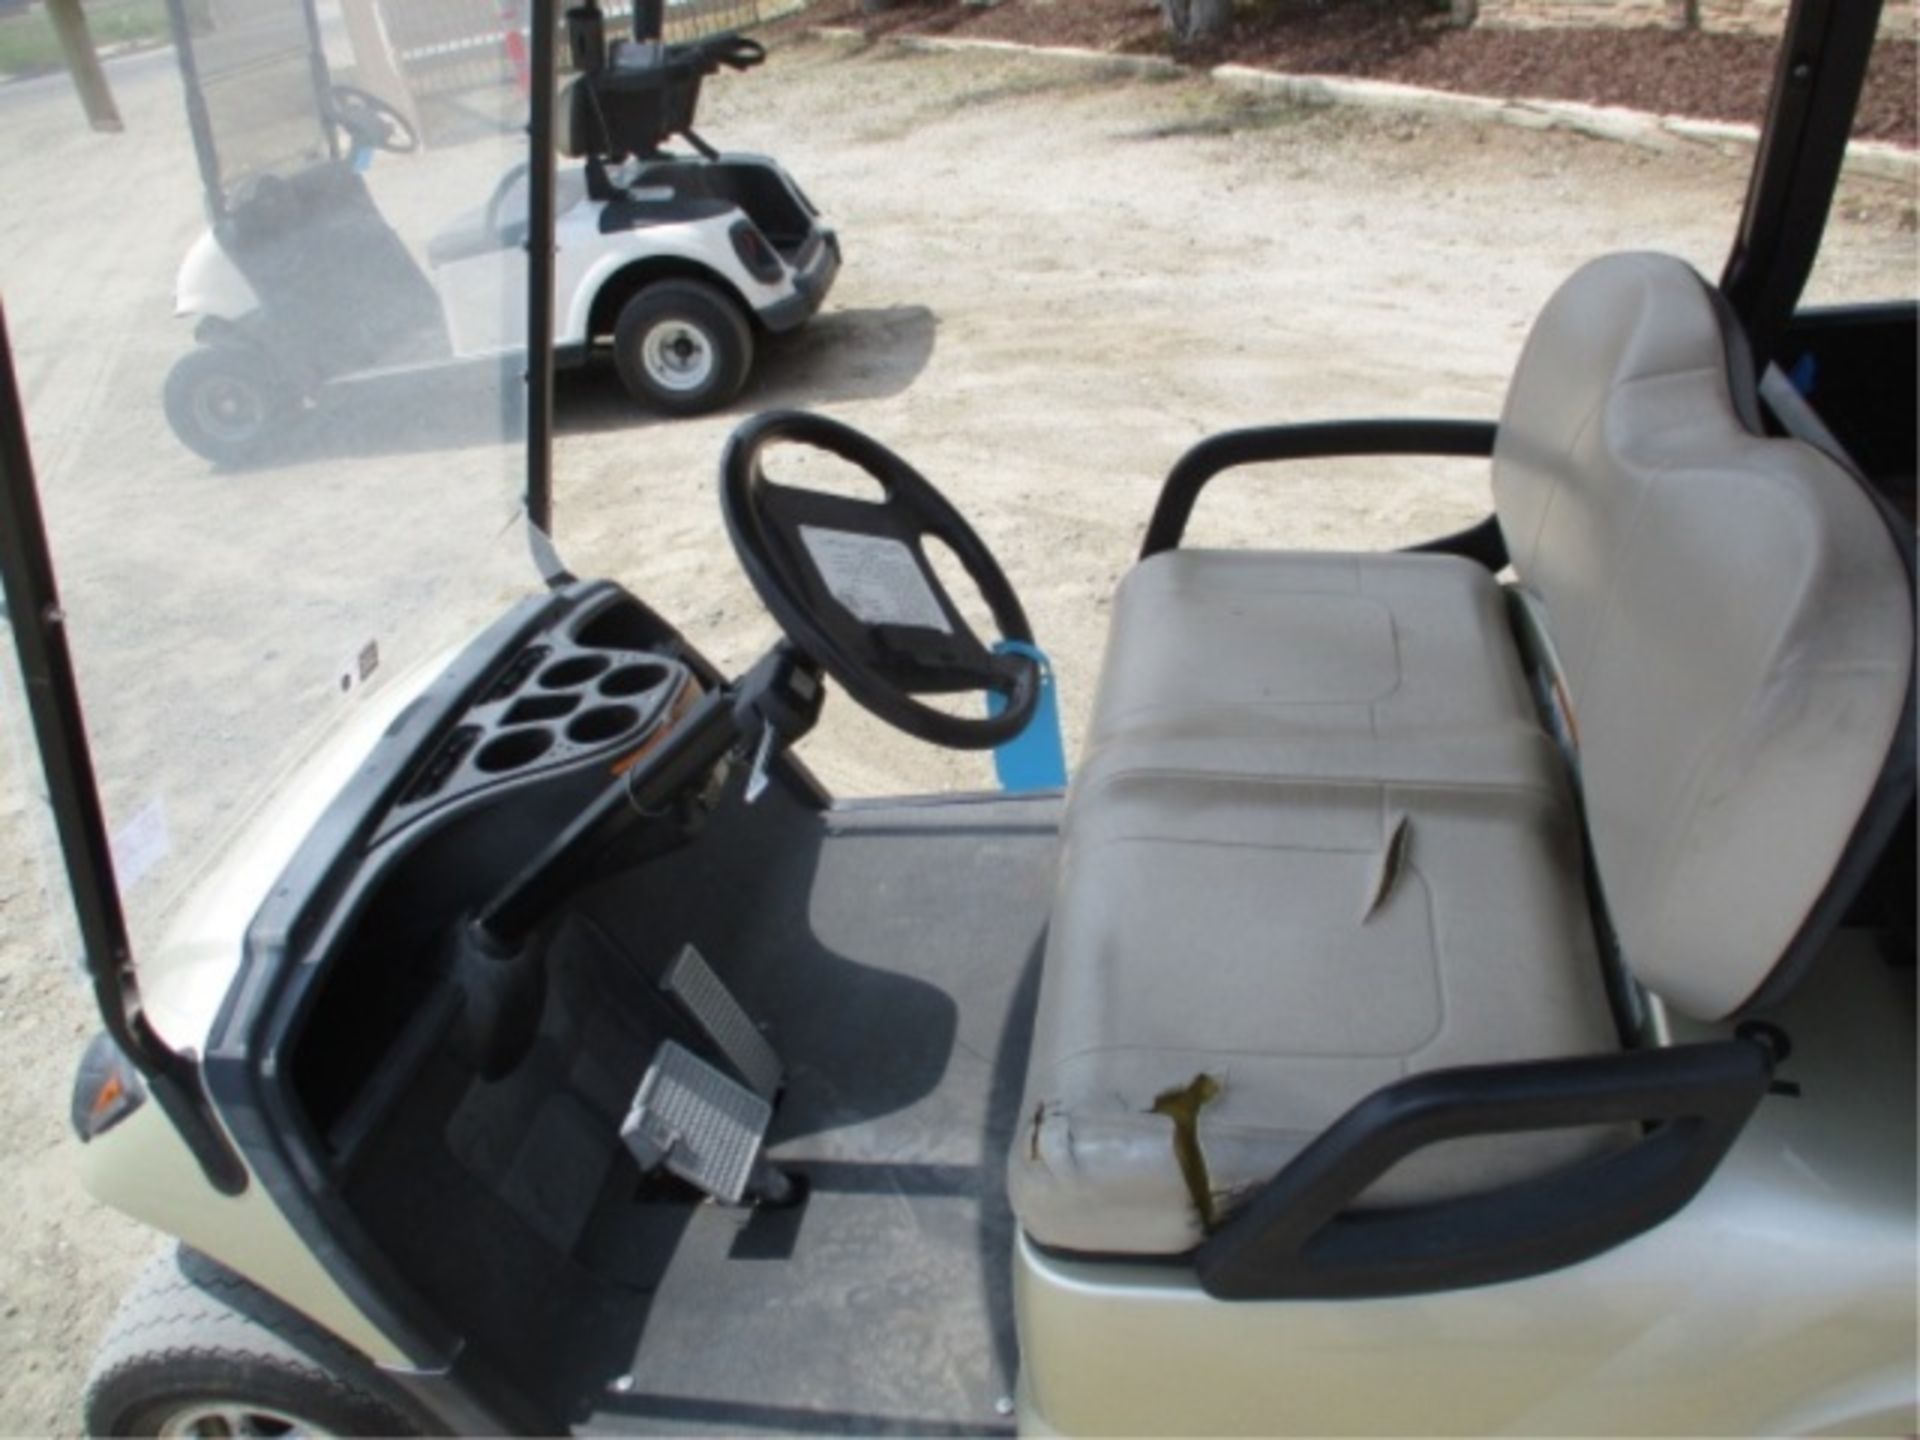 Yamaha Utility Golf Cart, Electric, Rear Metal Bed, Canopy, Includes Charger, S/N: JW1-F423610 - Image 13 of 24